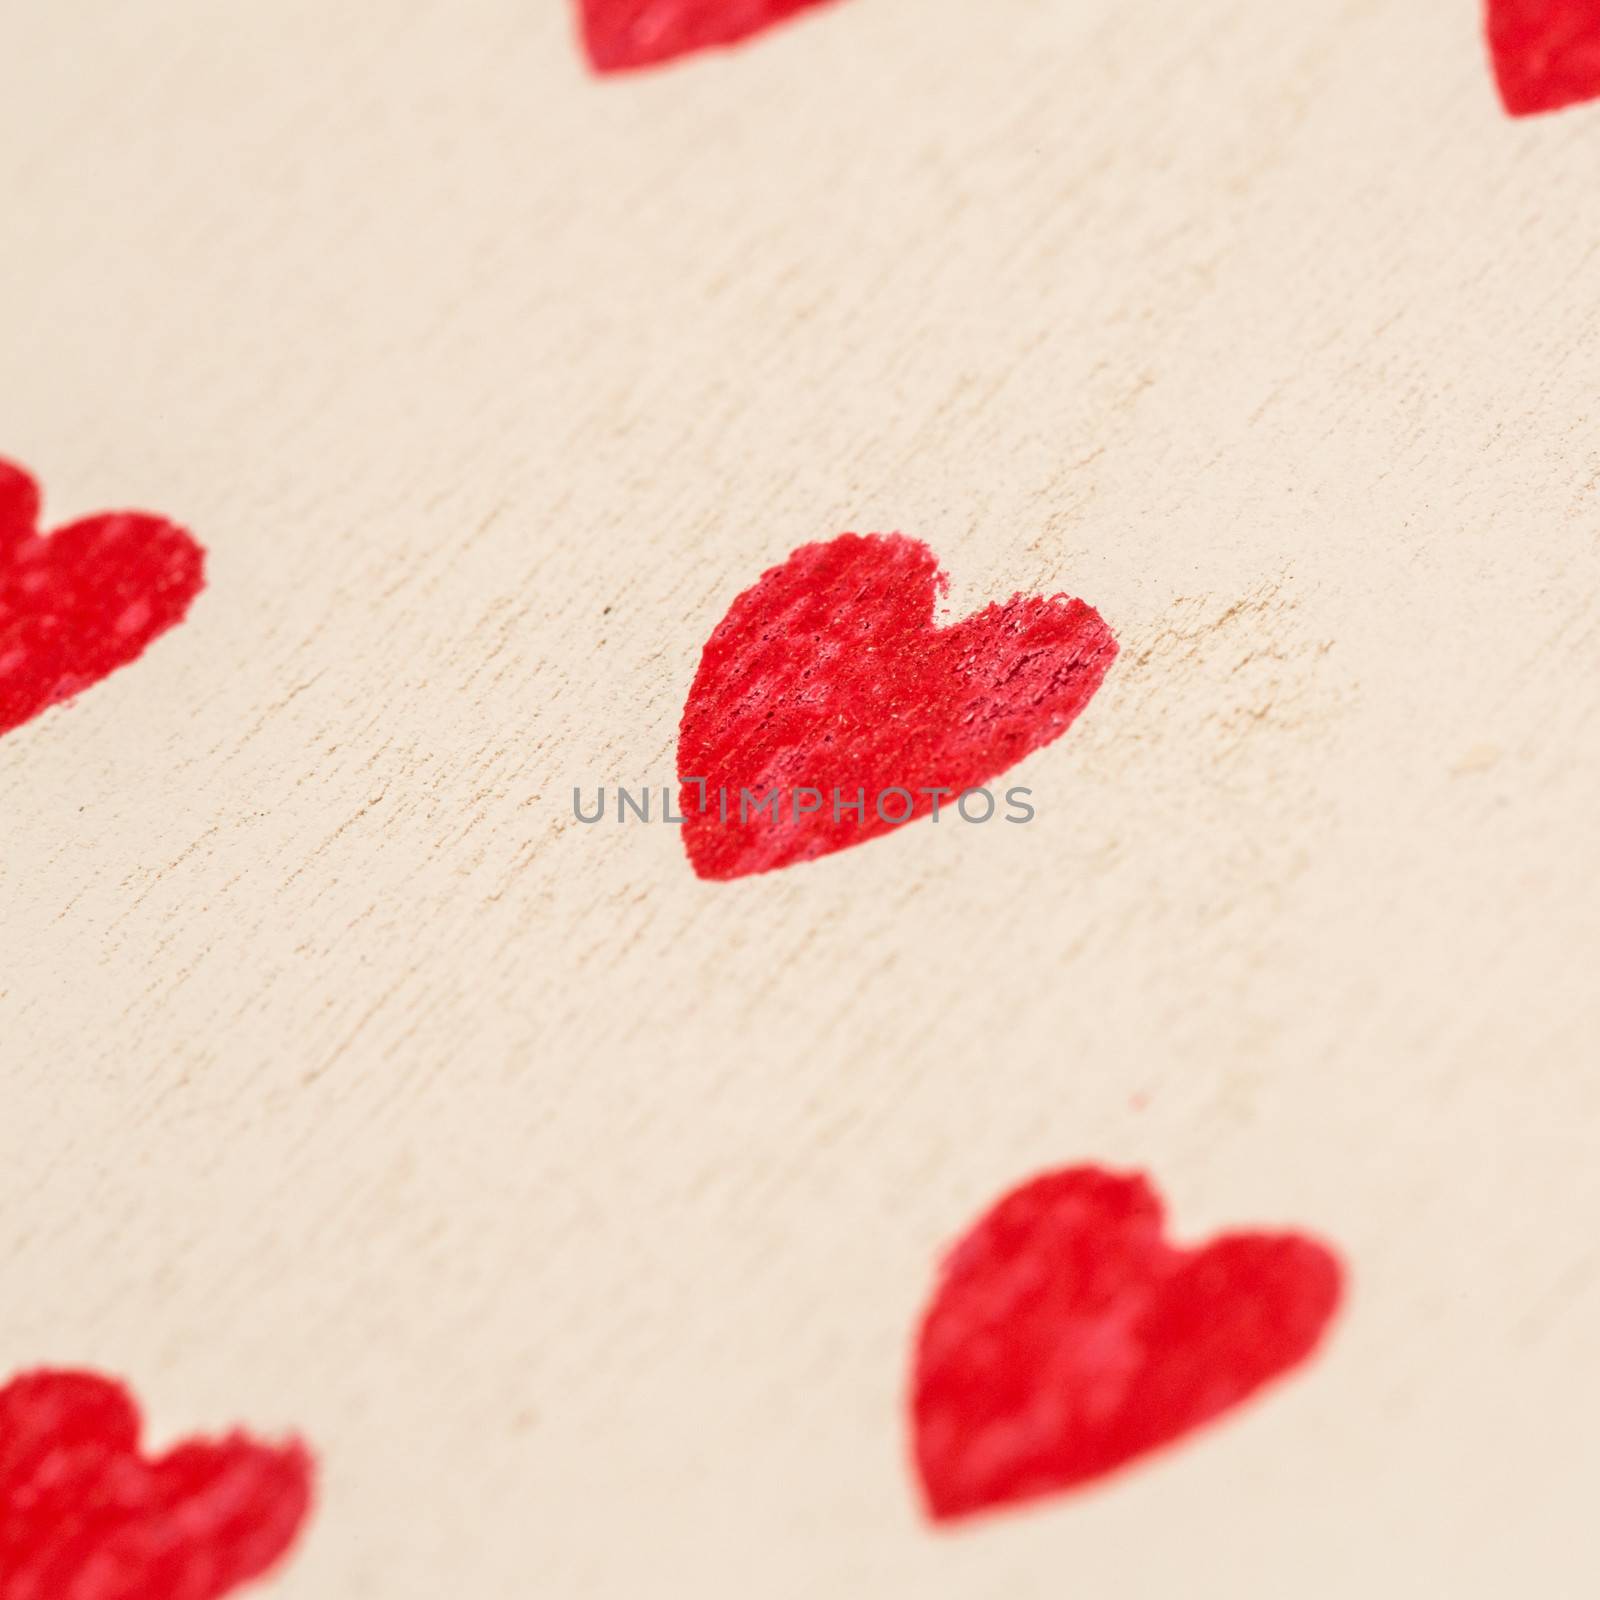 Red hearts painted on wood by Wavebreakmedia